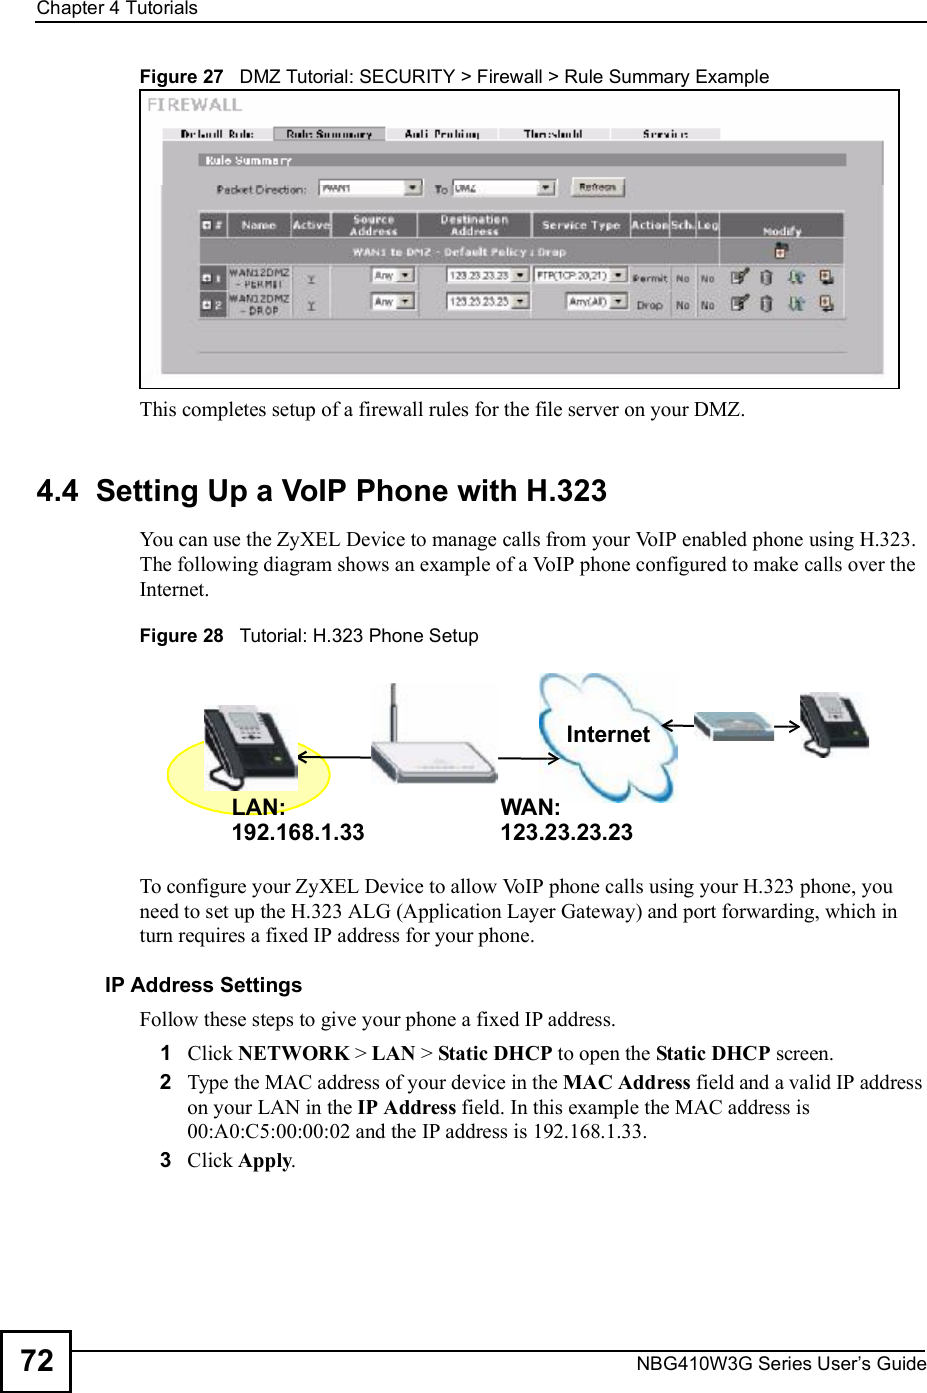 Chapter 4TutorialsNBG410W3G Series User s Guide72Figure 27   DMZ Tutorial: SECURITY &gt; Firewall &gt; Rule Summary ExampleThis completes setup of a firewall rules for the file server on your DMZ.4.4  Setting Up a VoIP Phone with H.323You can use the ZyXEL Device to manage calls from your VoIP enabled phone using H.323. The following diagram shows an example of a VoIP phone configured to make calls over the Internet. Figure 28   Tutorial: H.323 Phone SetupTo configure your ZyXEL Device to allow VoIP phone calls using your H.323 phone, you need to set up the H.323 ALG (Application Layer Gateway) and port forwarding, which in turn requires a fixed IP address for your phone.IP Address SettingsFollow these steps to give your phone a fixed IP address.1Click NETWORK &gt; LAN &gt; Static DHCP to open the Static DHCP screen. 2Type the MAC address of your device in the MAC Address field and a valid IP address on your LAN in the IP Address field. In this example the MAC address is 00:A0:C5:00:00:02 and the IP address is 192.168.1.33.3Click Apply.InternetLAN: WAN:192.168.1.33123.23.23.23